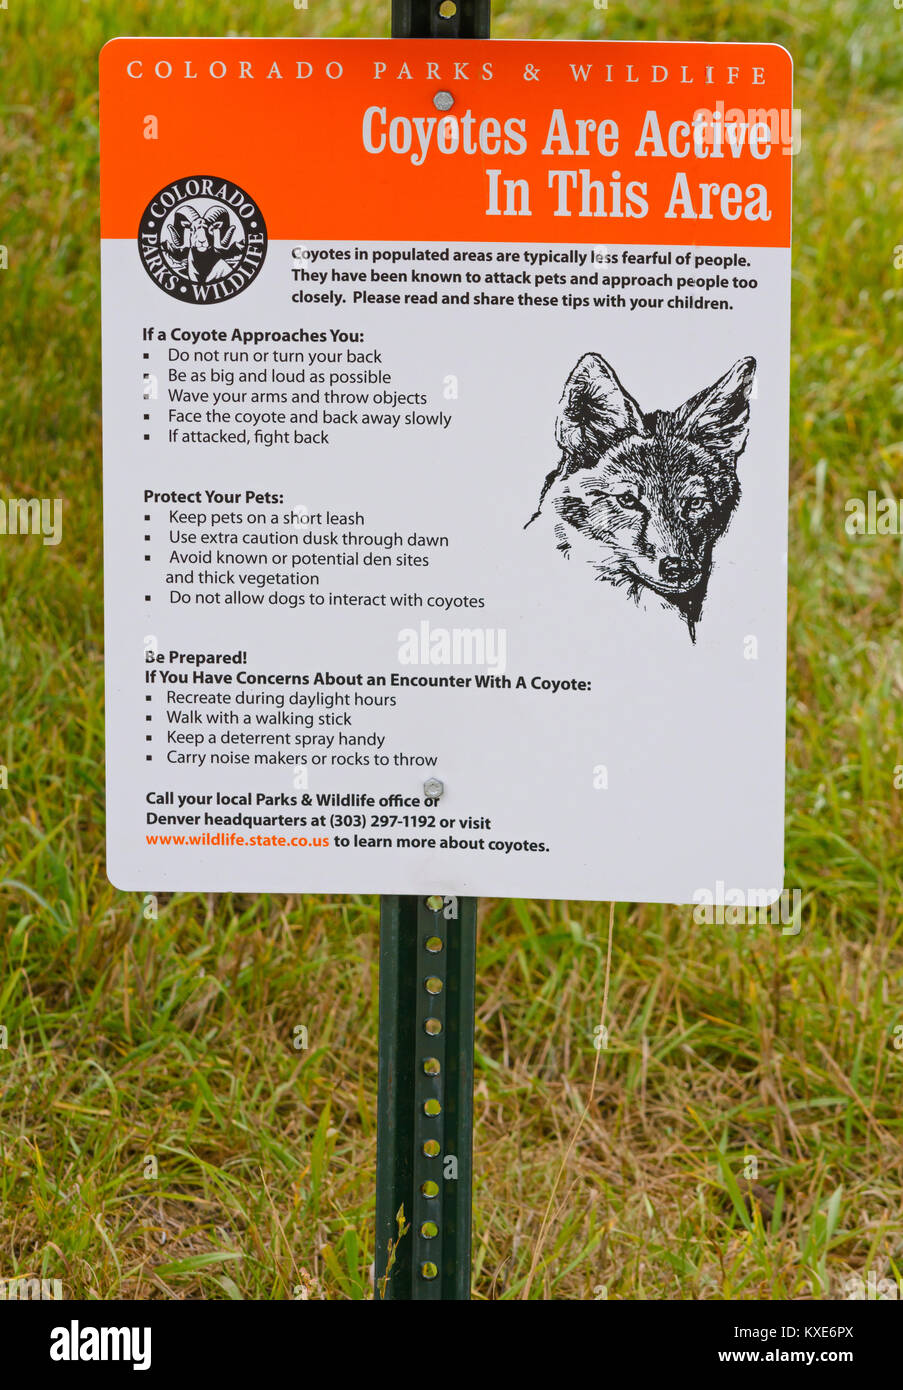 https://c8.alamy.com/comp/KXE6PX/coyotes-in-the-area-warning-sign-along-hiking-trail-colorado-us-KXE6PX.jpg